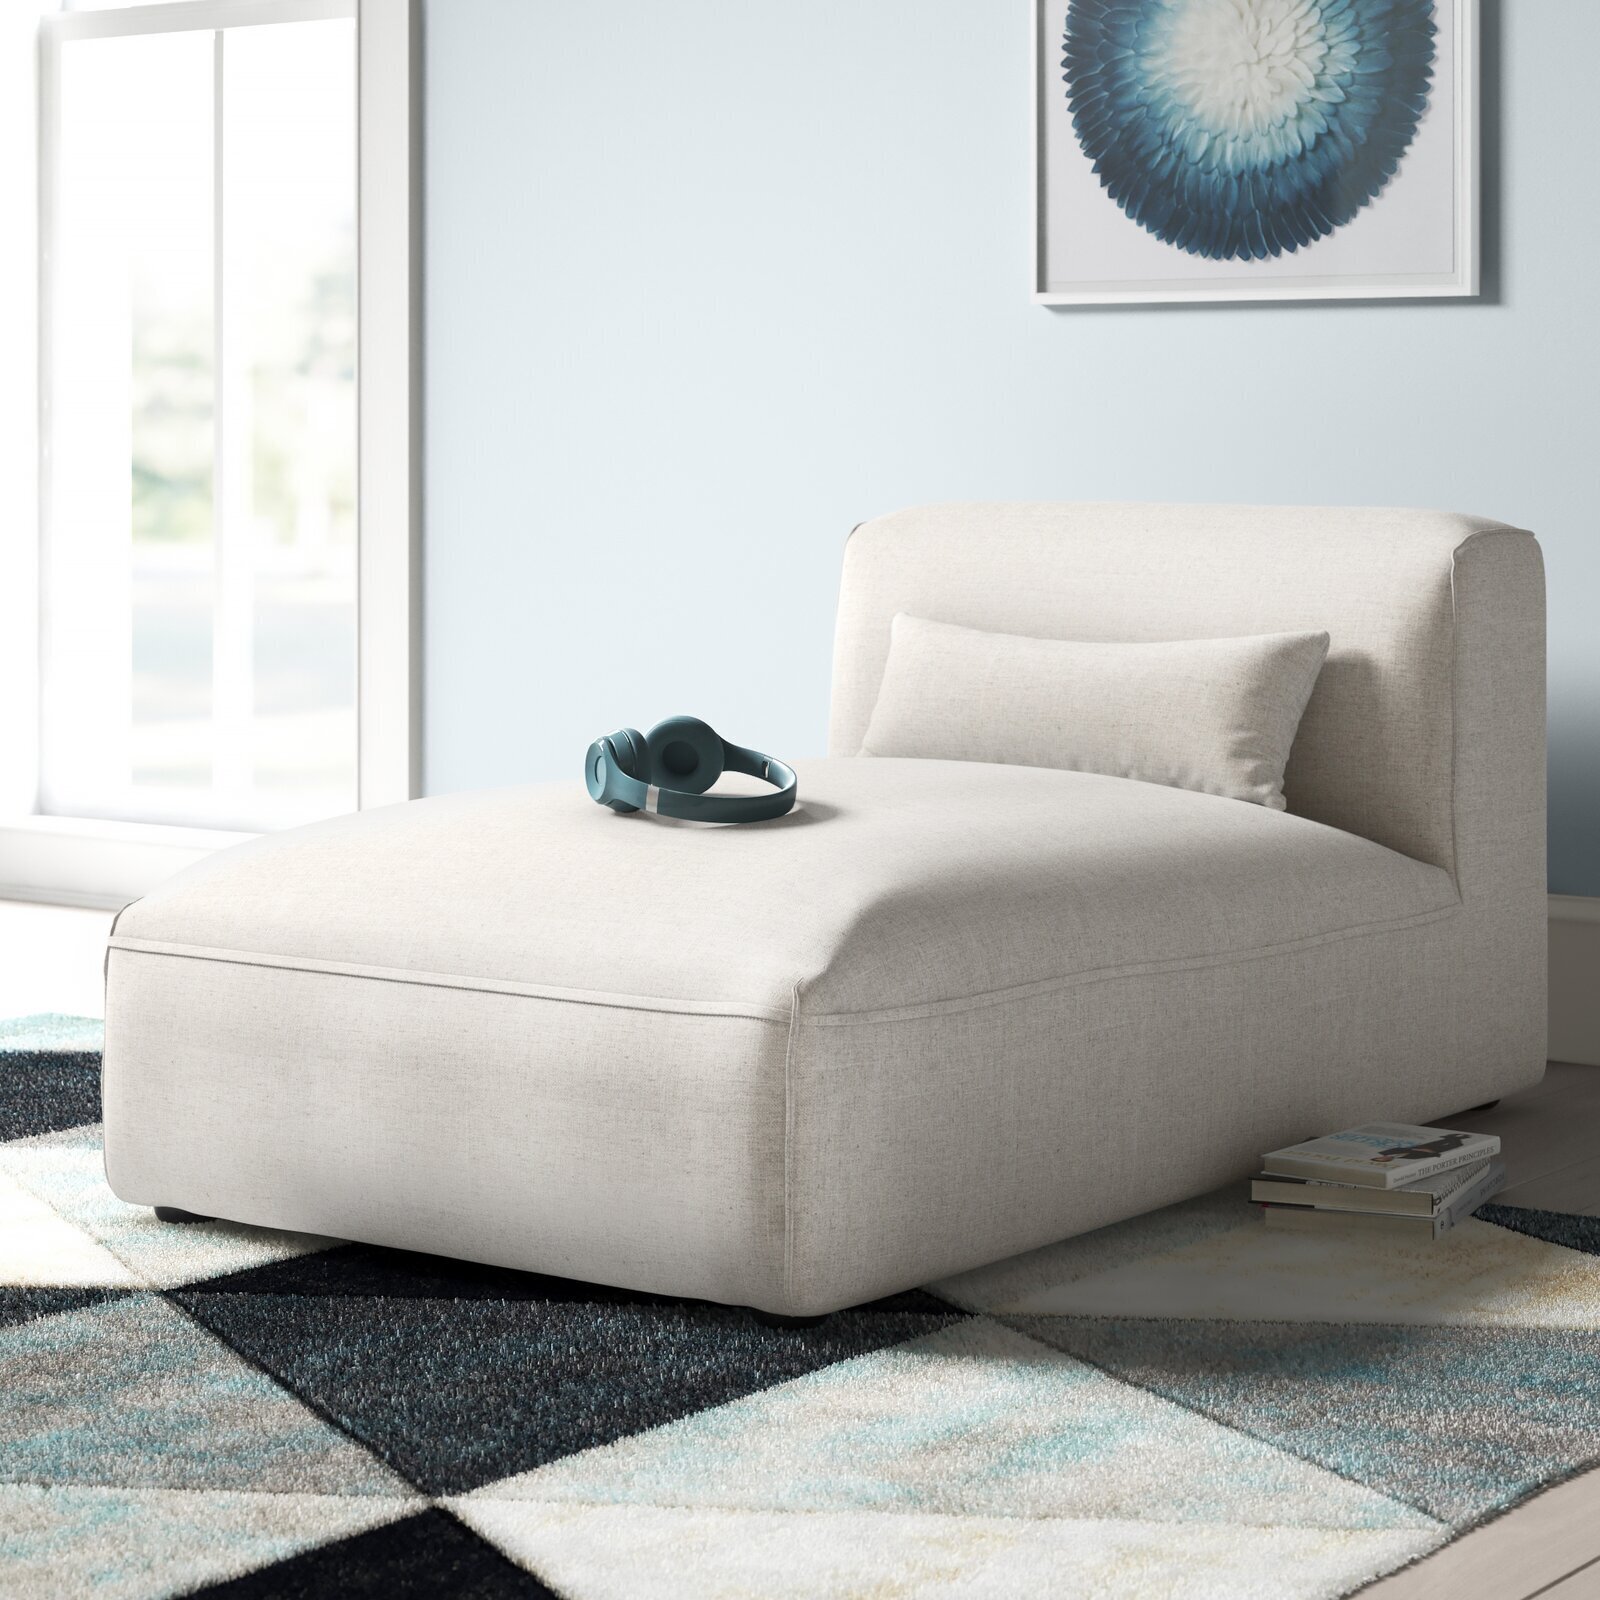 Armless white chaise lounge for casual seating